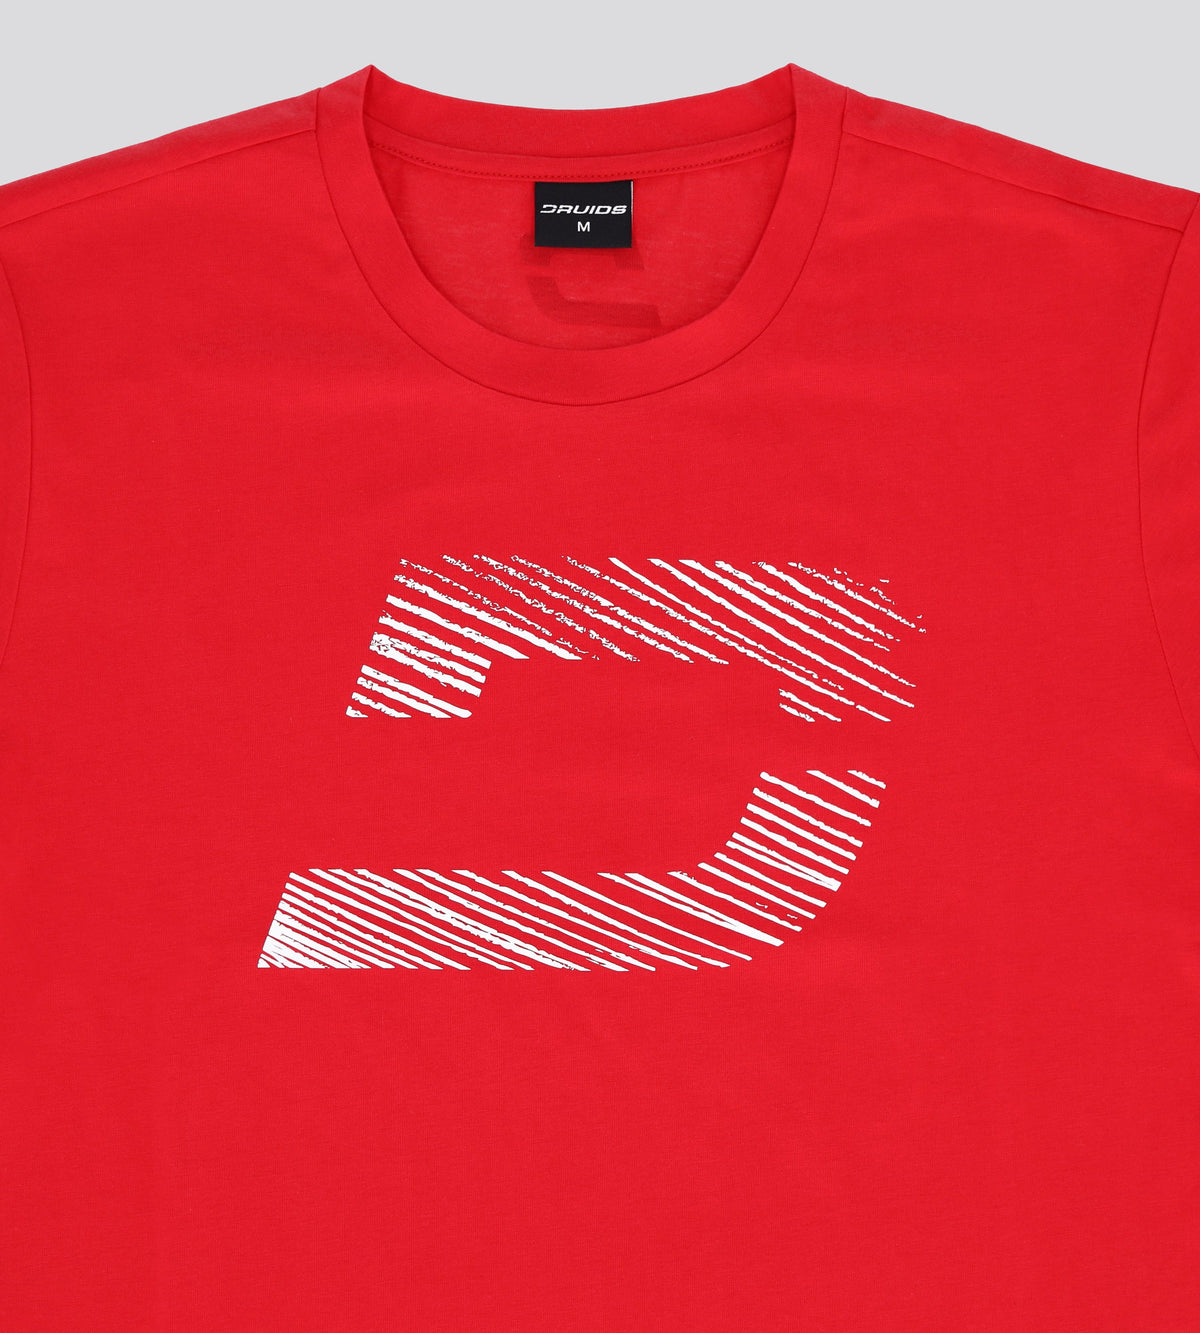 SKETCH TEE - RED